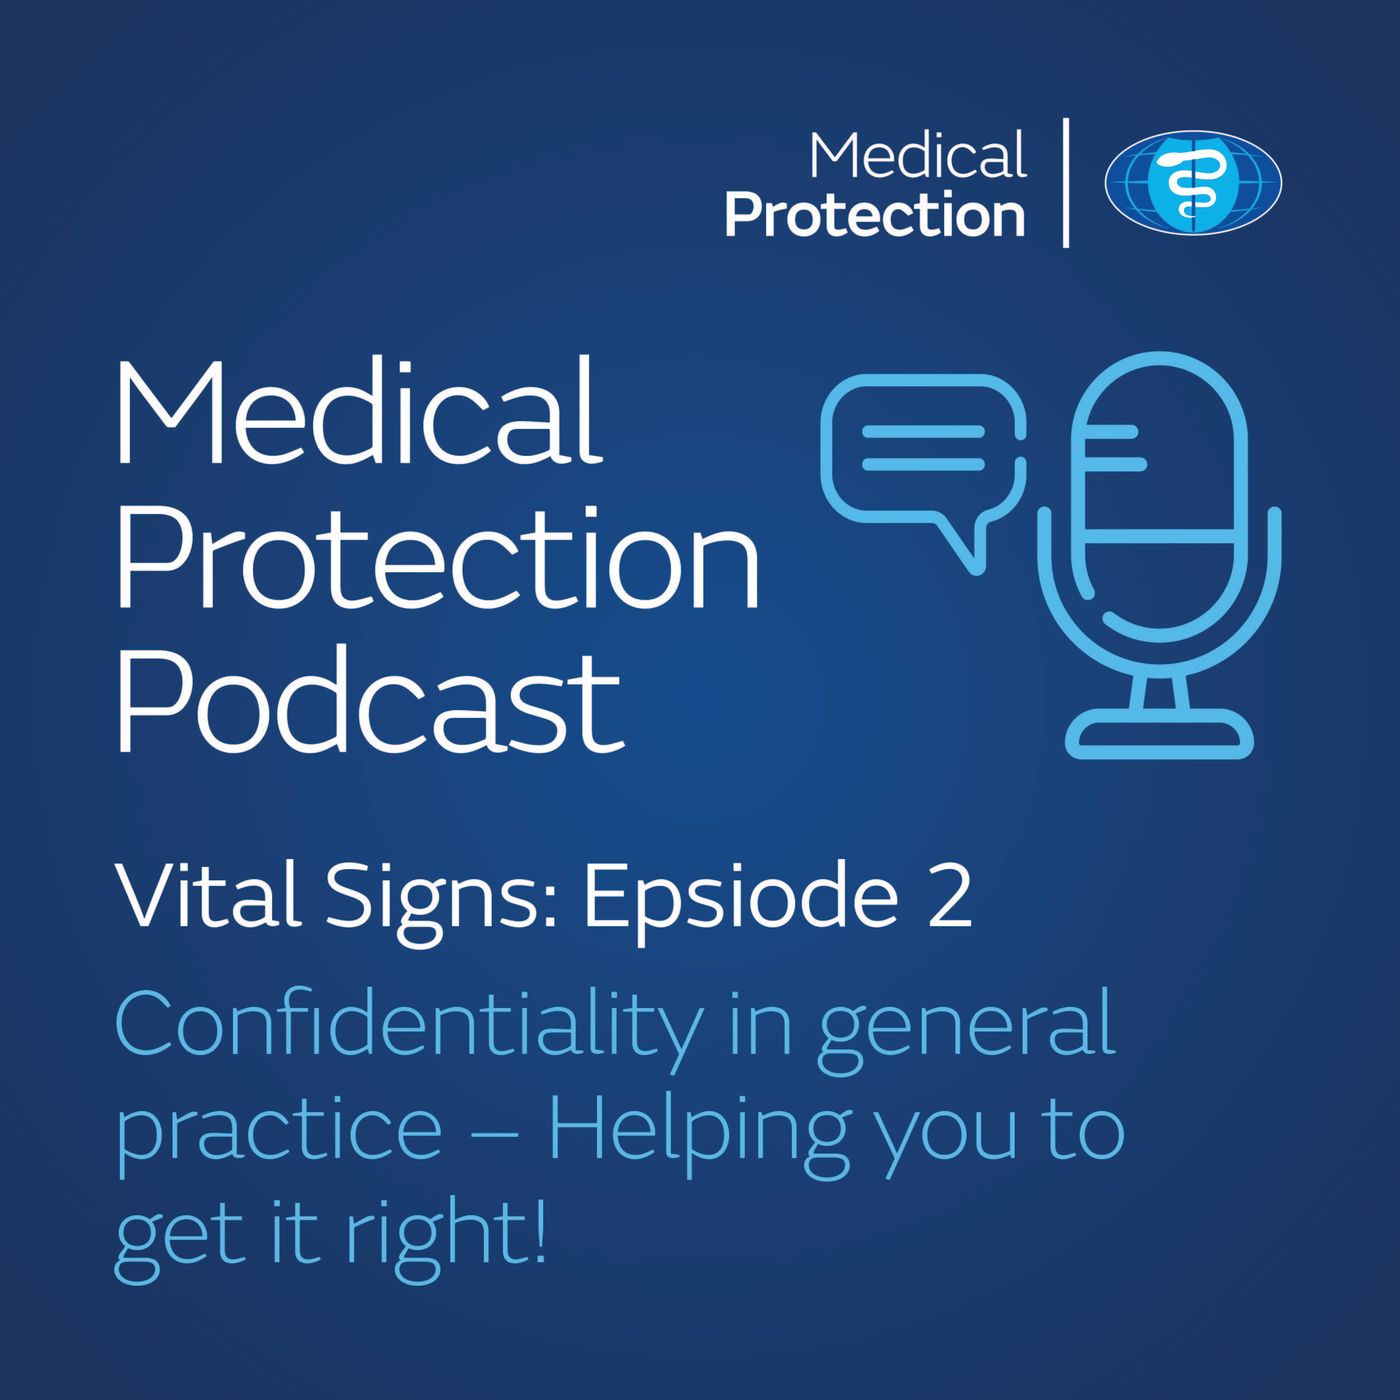 Vital Signs episode 2: Confidentiality in general practice – helping you to get it right!